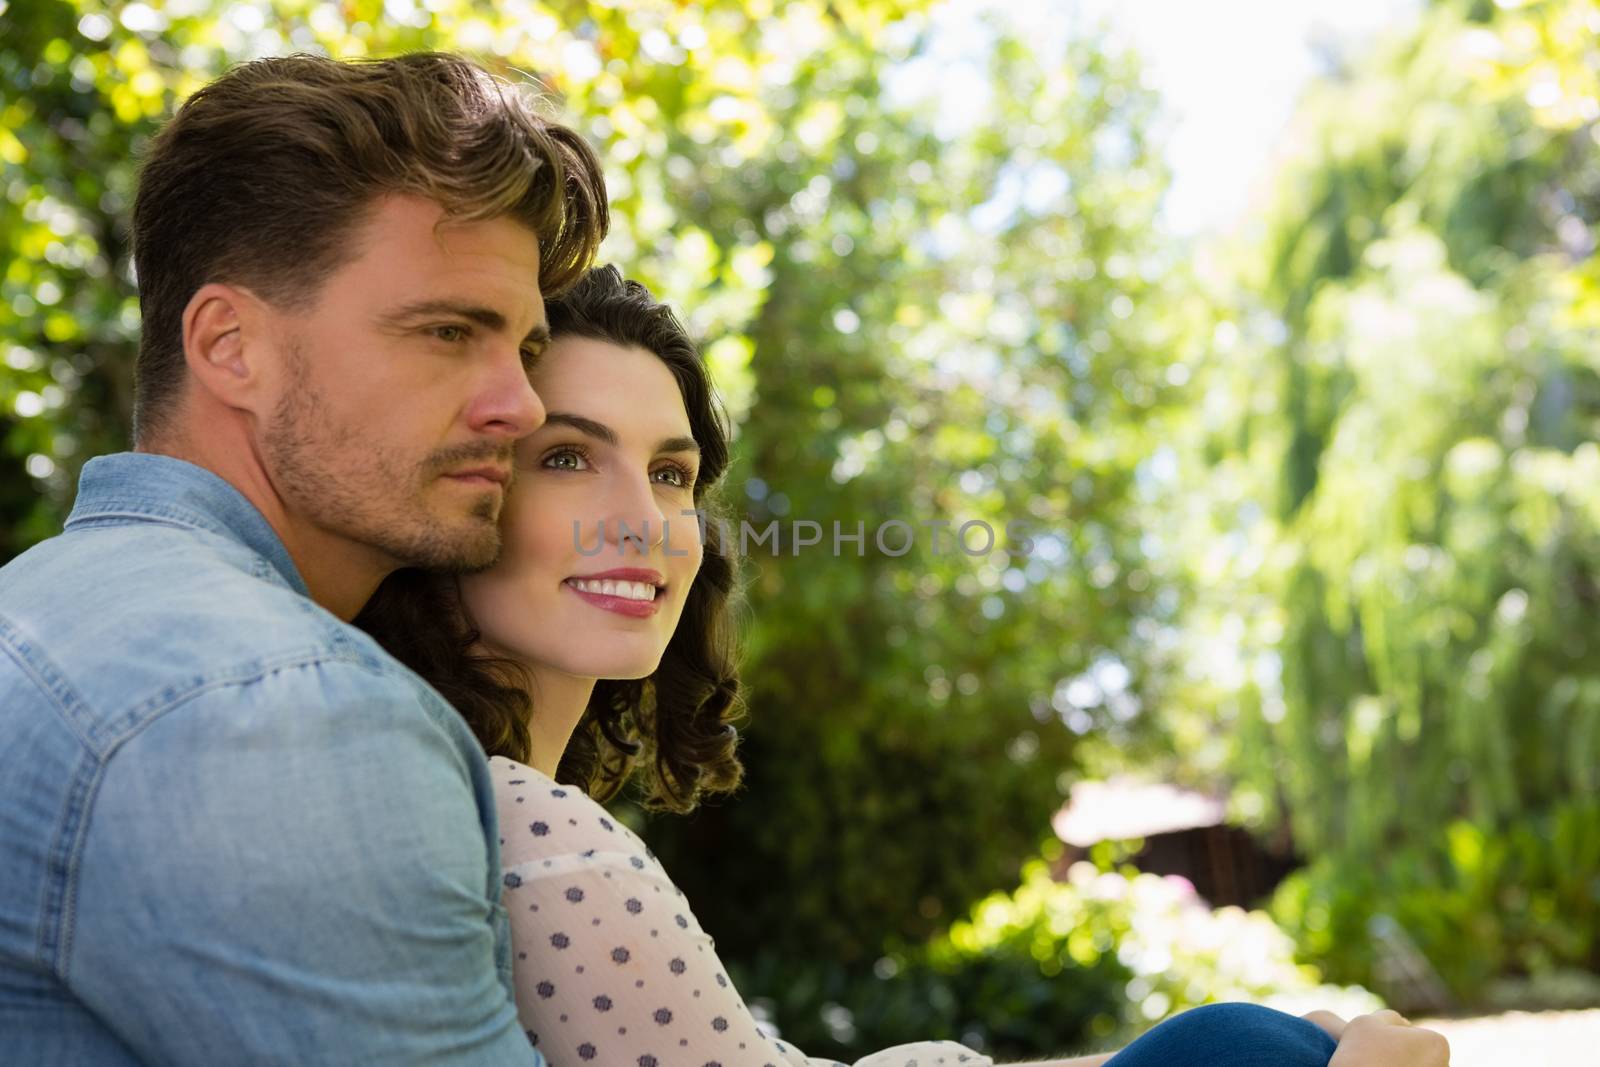 Romantic couple embracing each other in garden on a sunny day